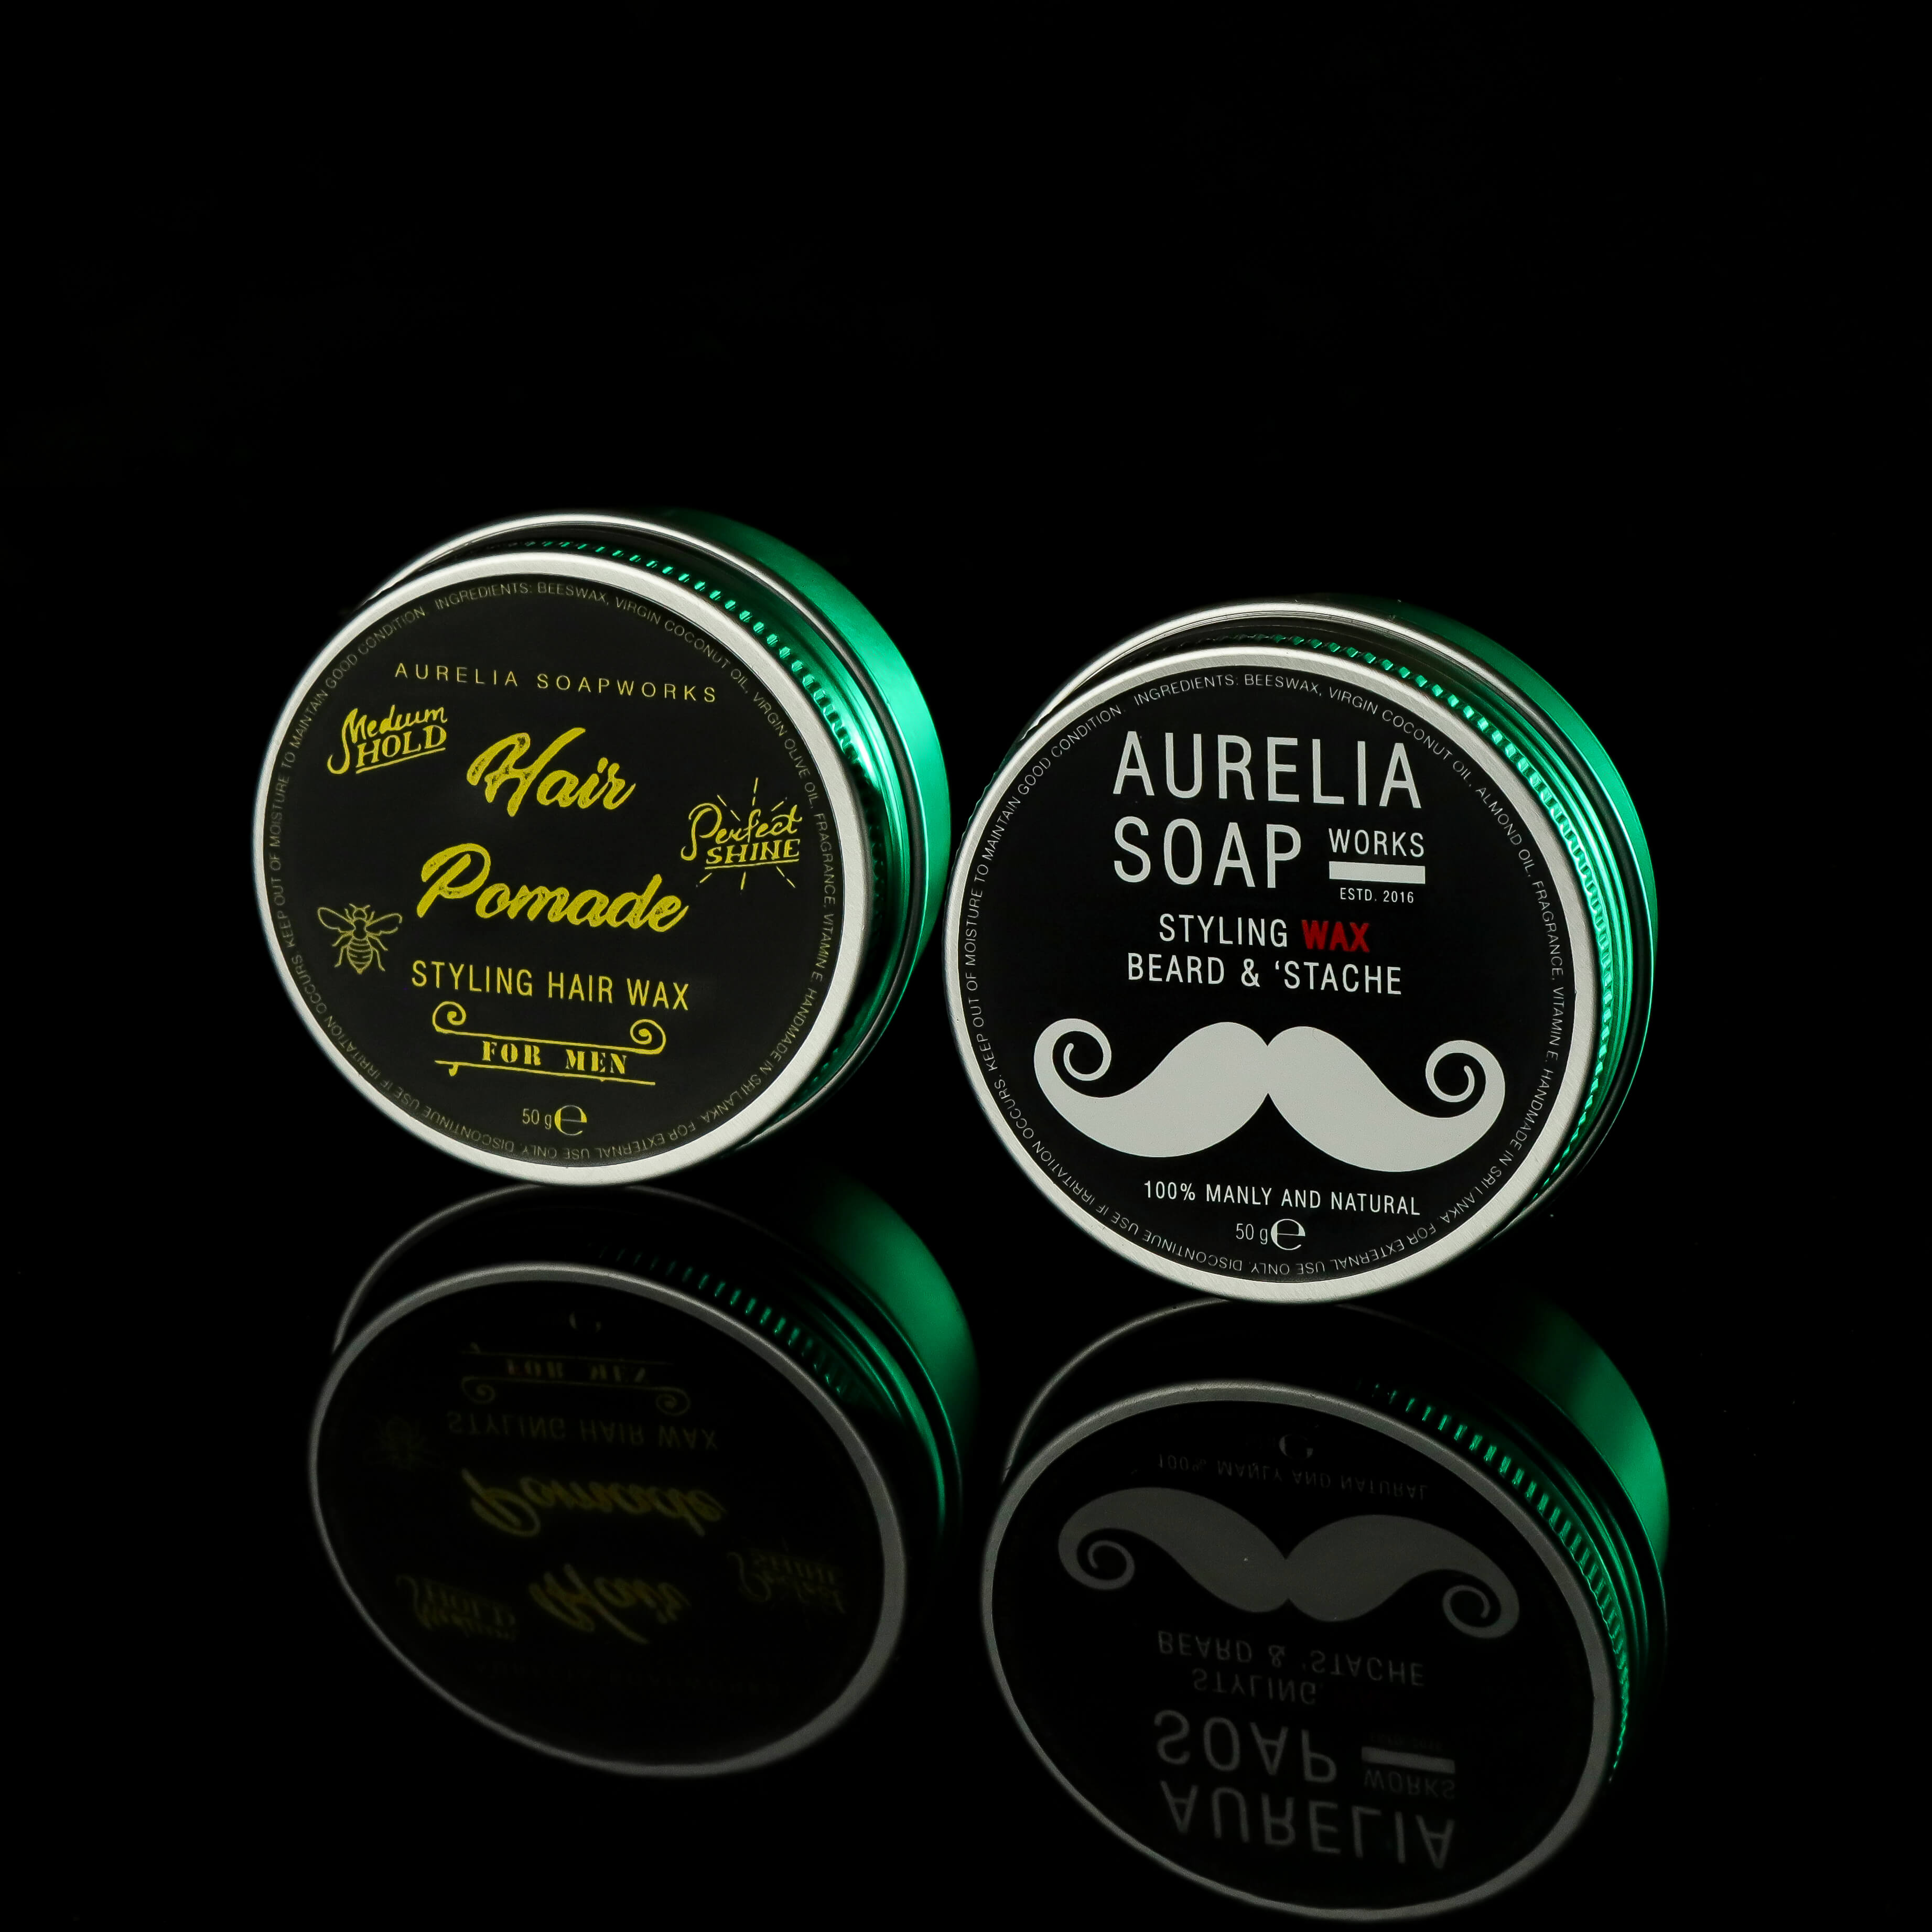 Beard, 'stache and hair styling collection